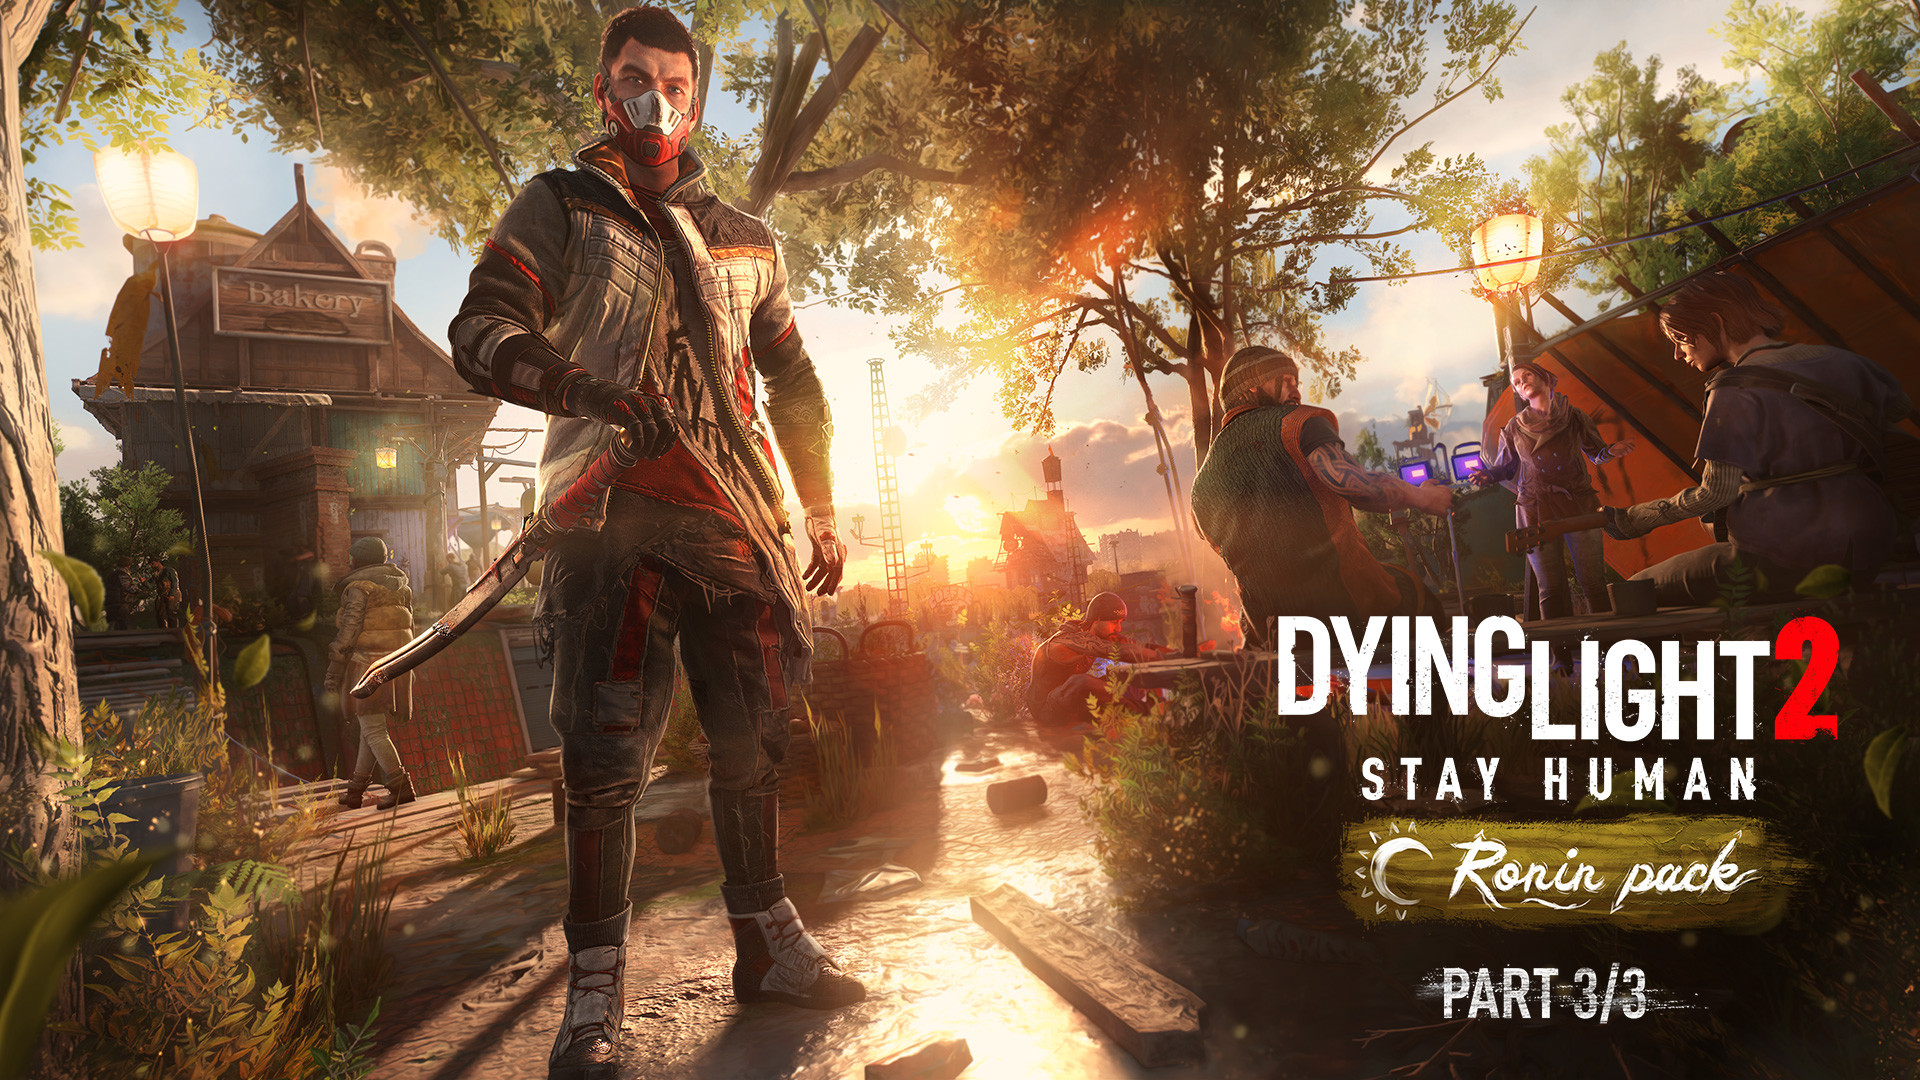 Dying Light 2 Stay Human: Ronin Pack—Part 3/3 Featured Screenshot #1